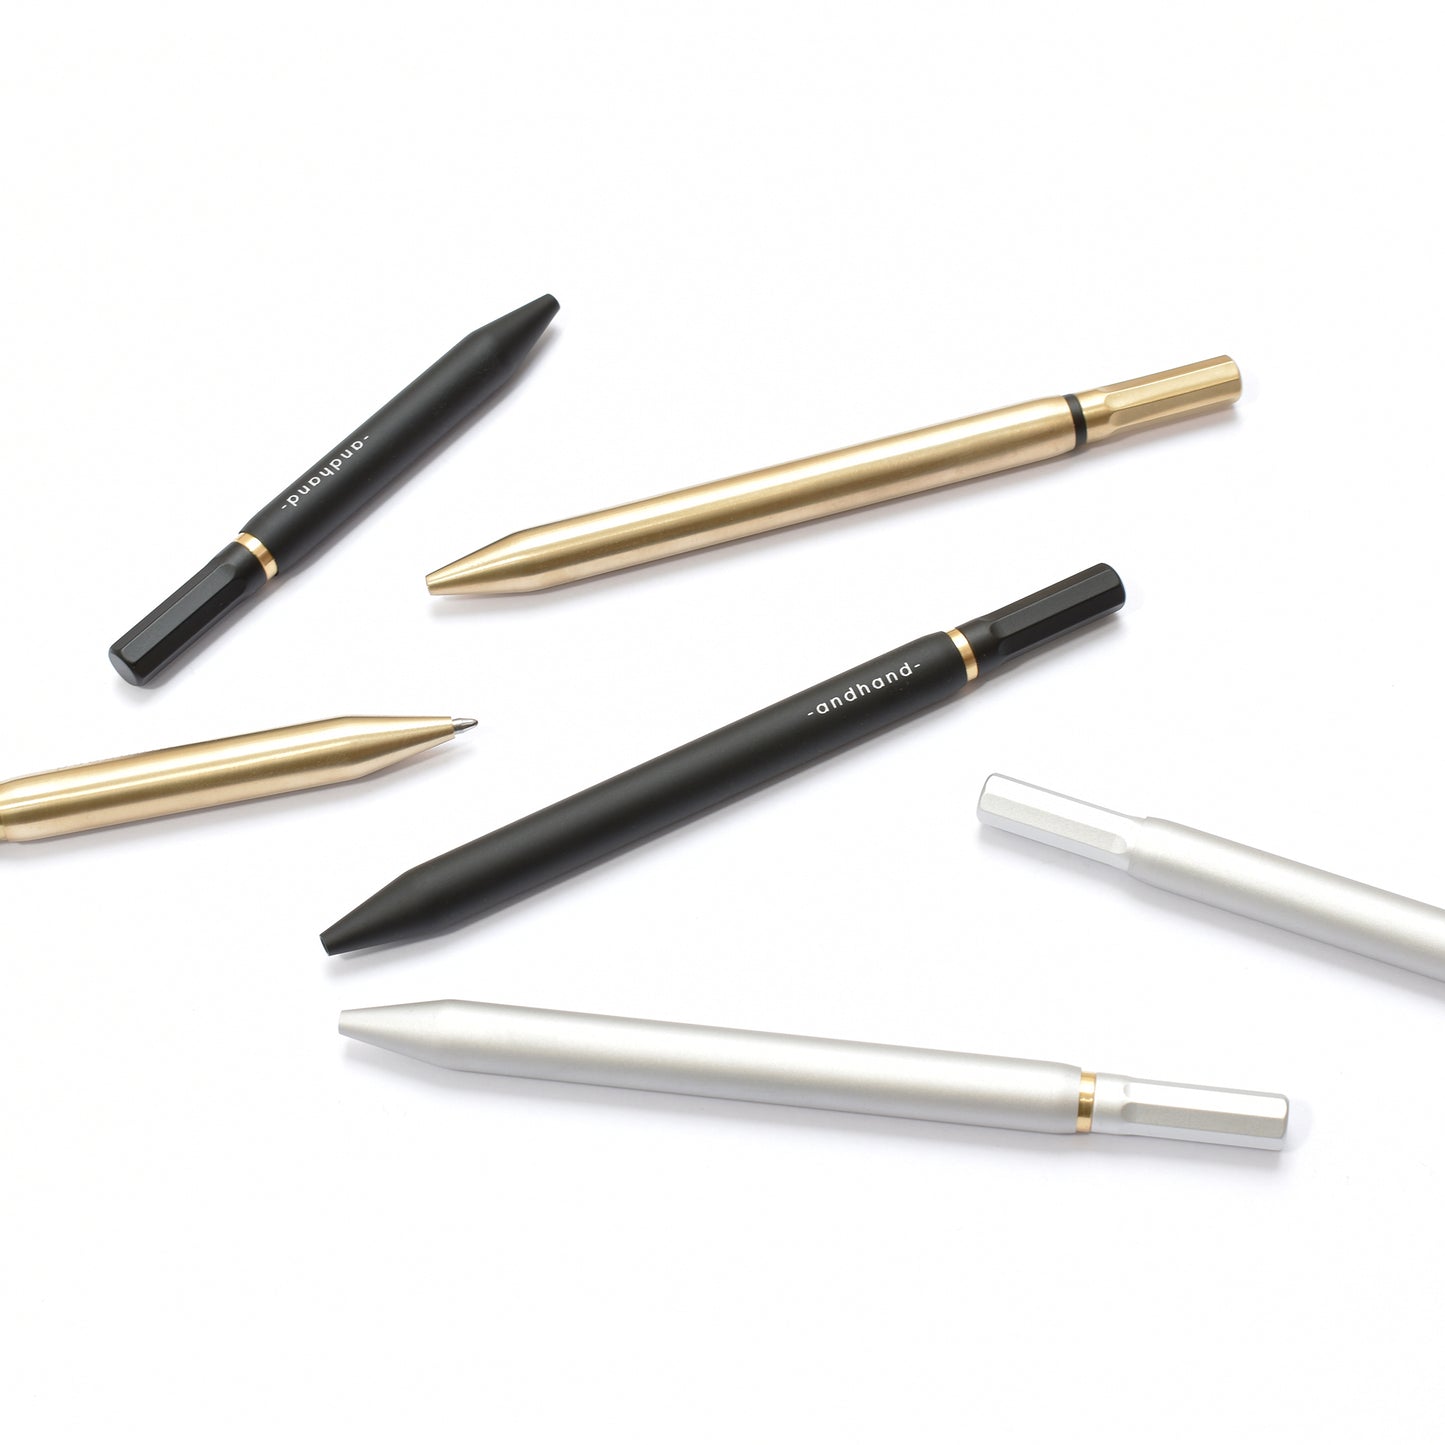 Aluminium and brass everyday carry black pen from Andhand. An expert compact writing tool with a smooth mechanism and modern minimal design. Amazingly durable and refined. Shown here in black satin anodized finish.